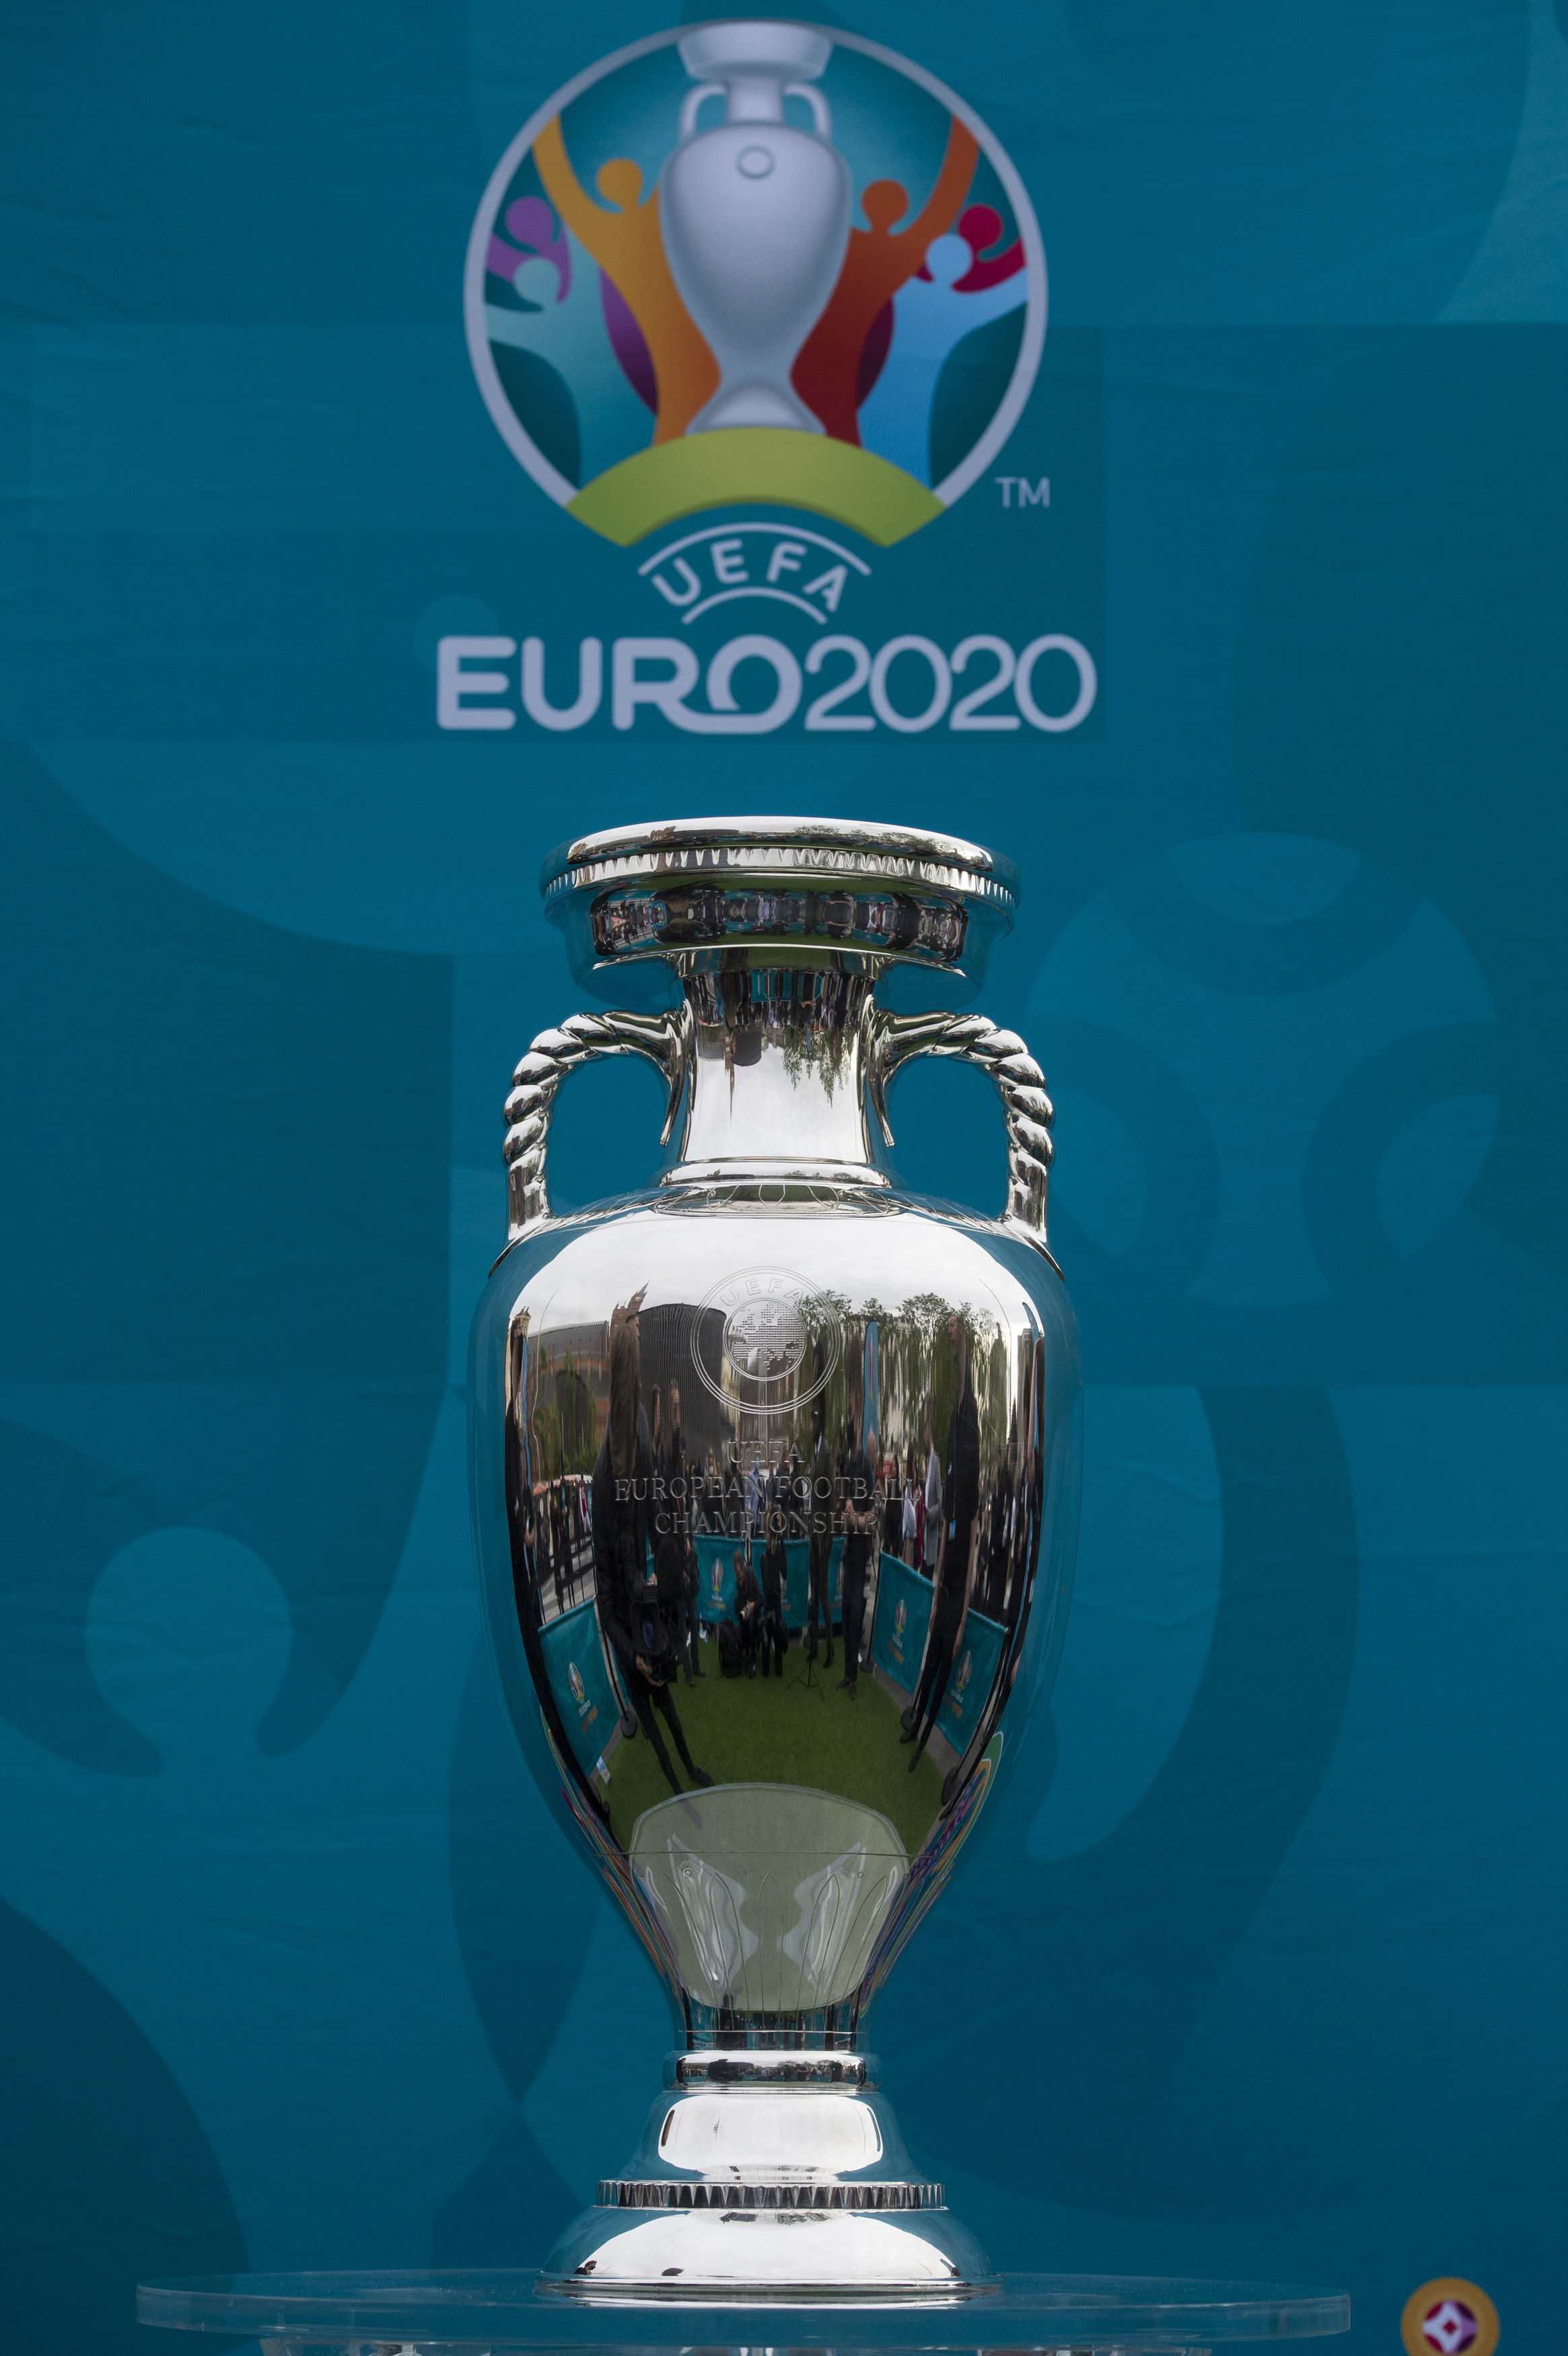 The team who wins Euro 2020 will lift the Henri Delaunay Cup. Picture by PA Wire